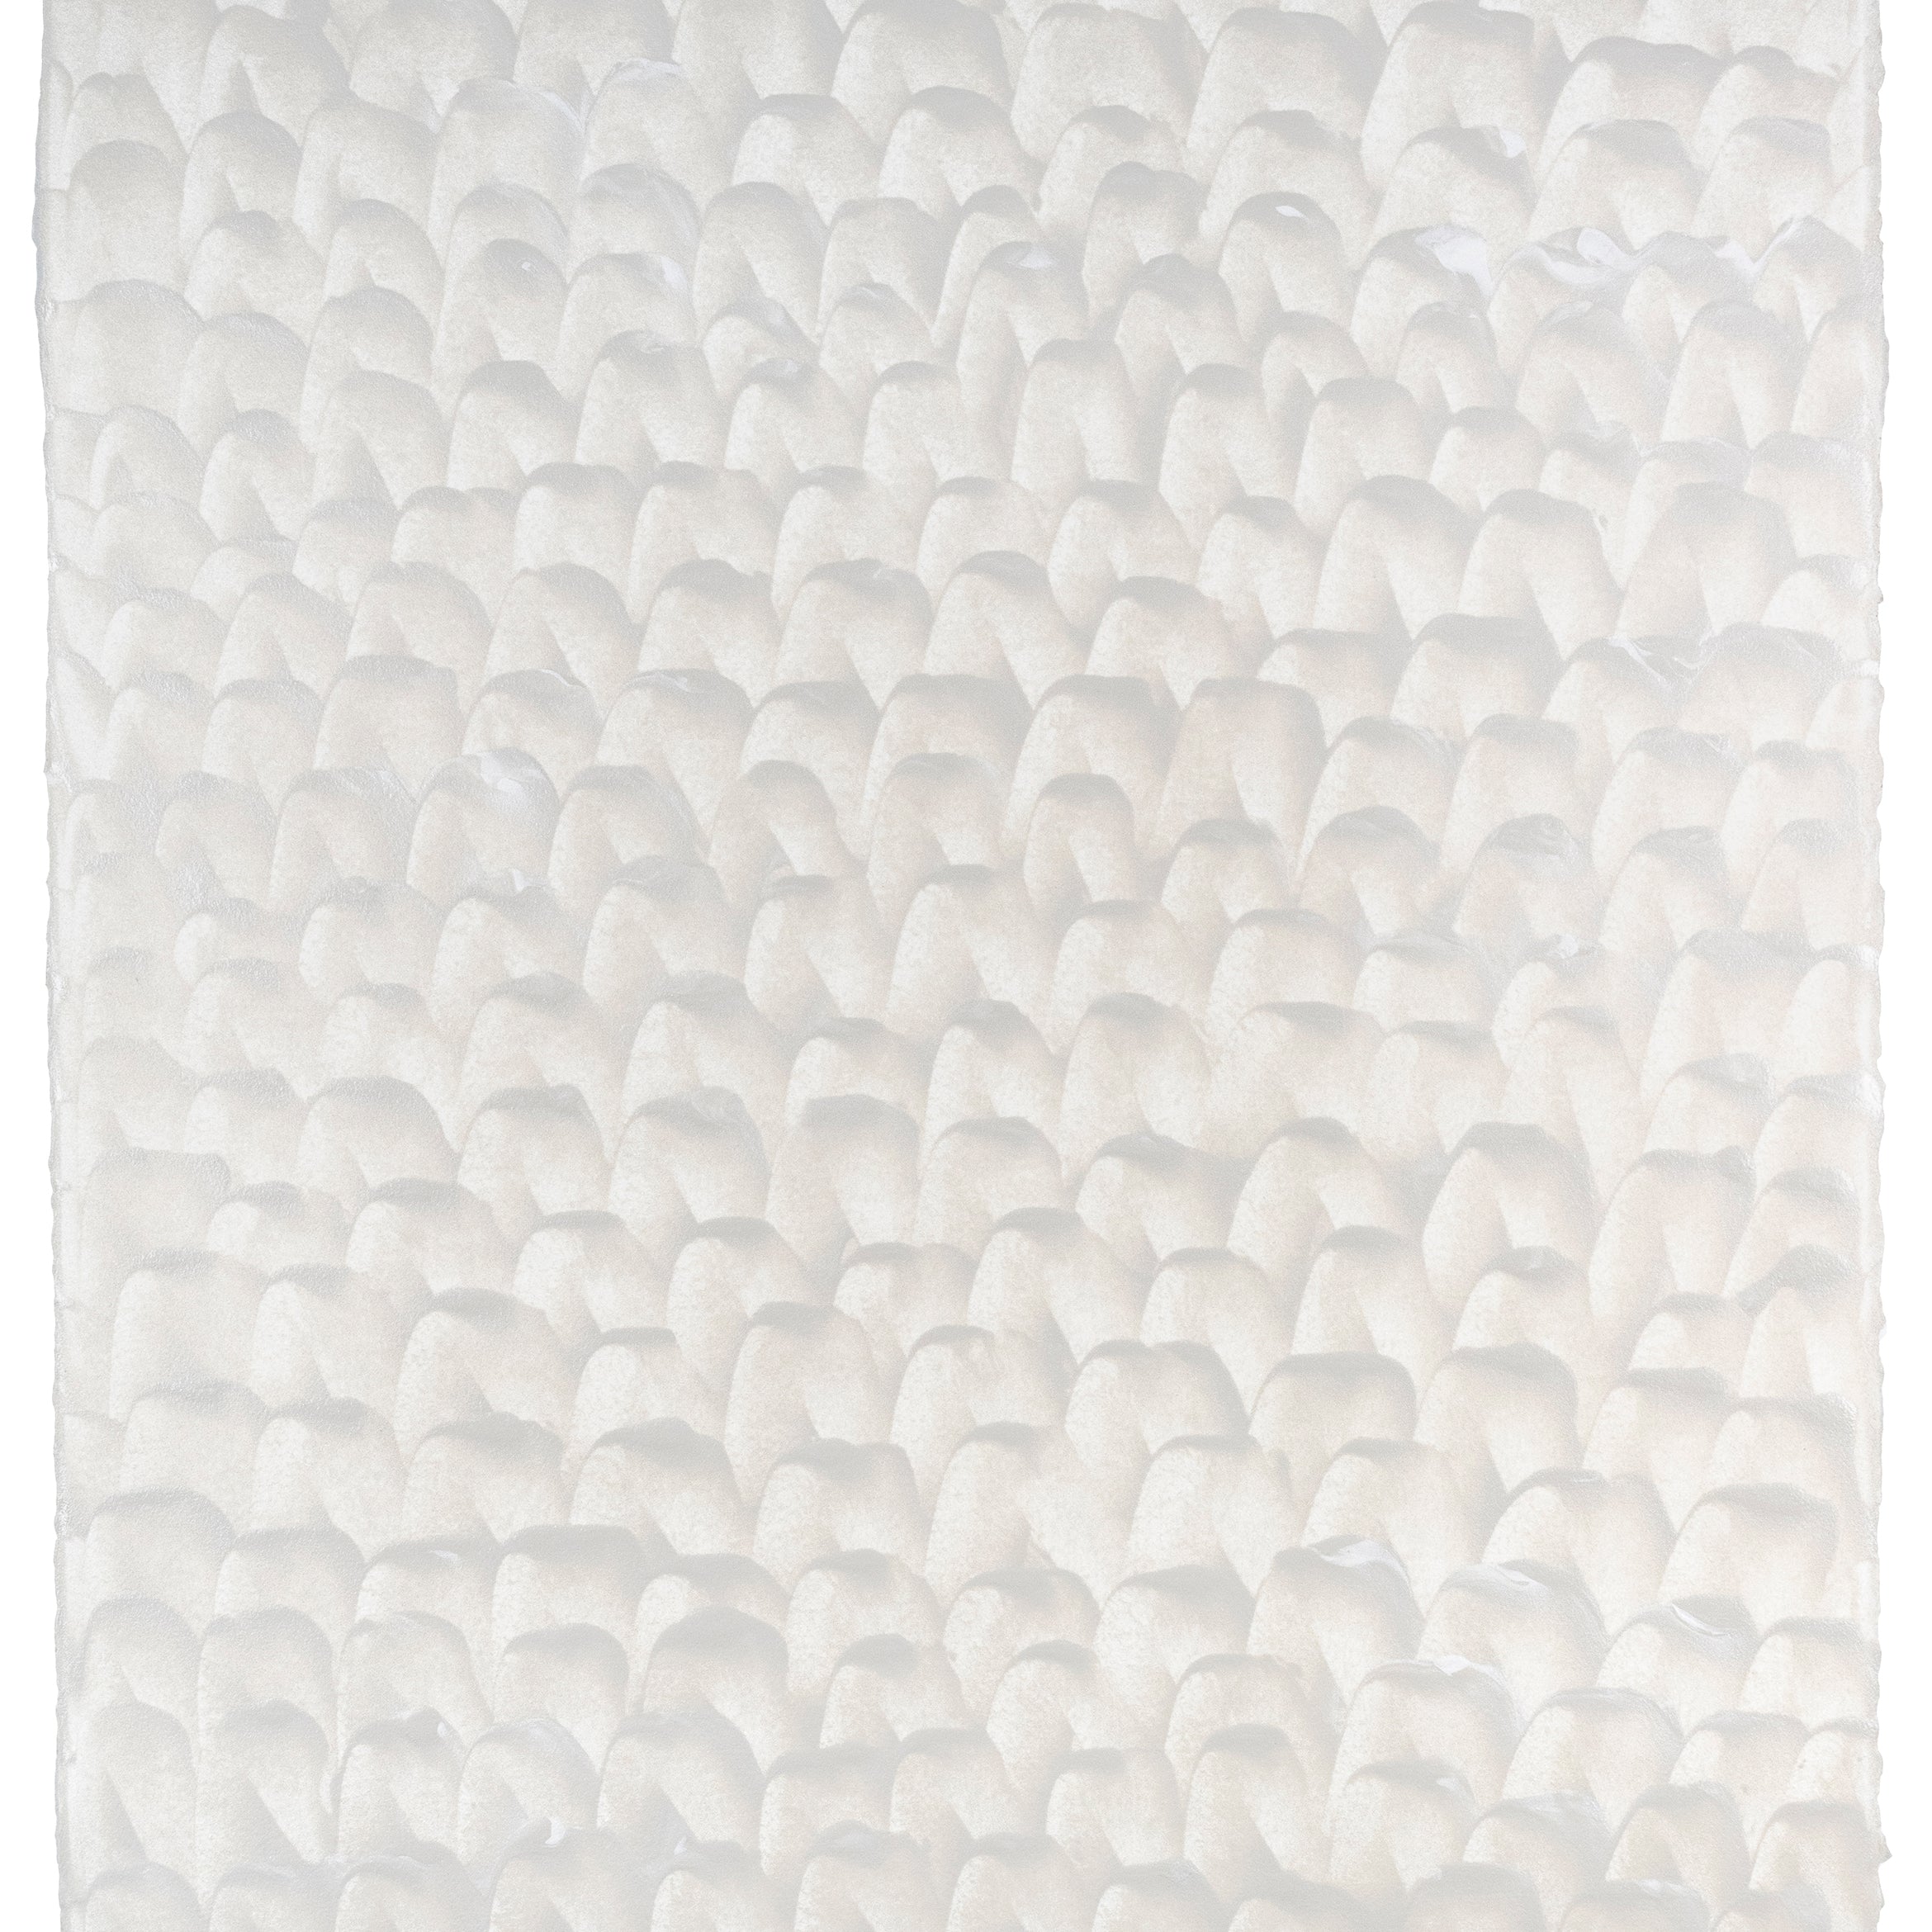 Sheet of hand-painted wallpaper with a repeating dappled texture in cream.